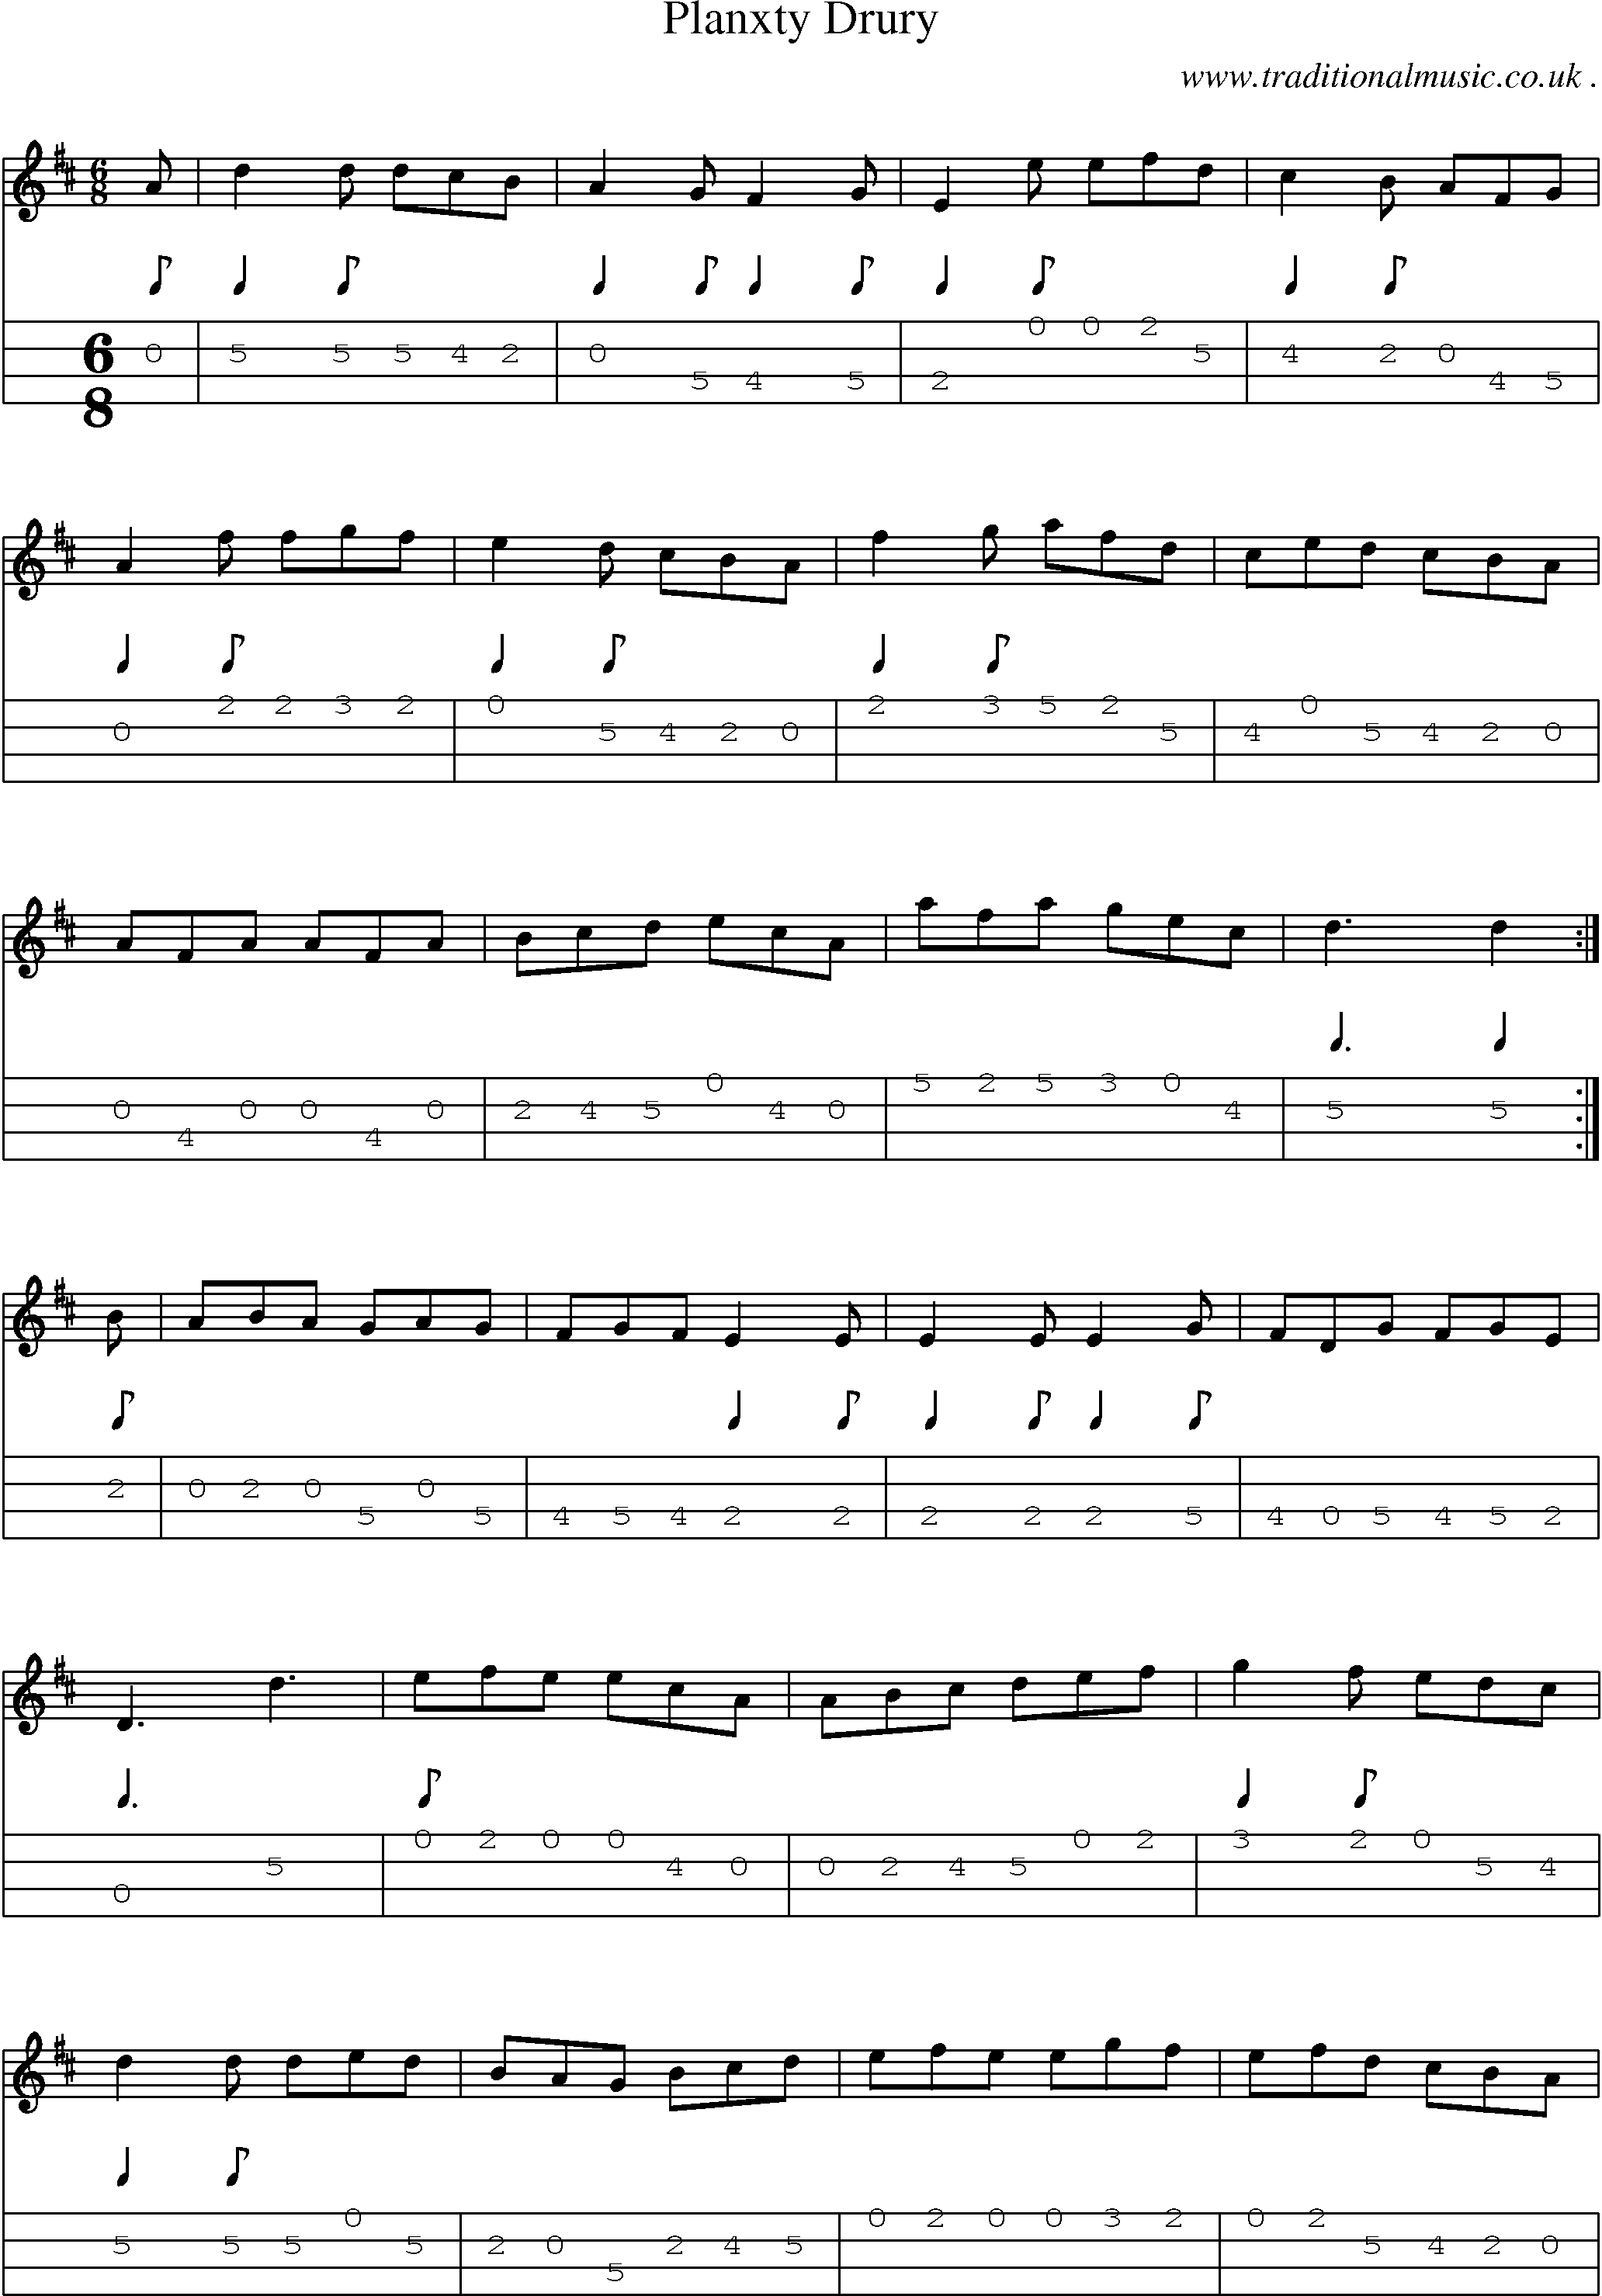 Sheet-Music and Mandolin Tabs for Planxty Drury